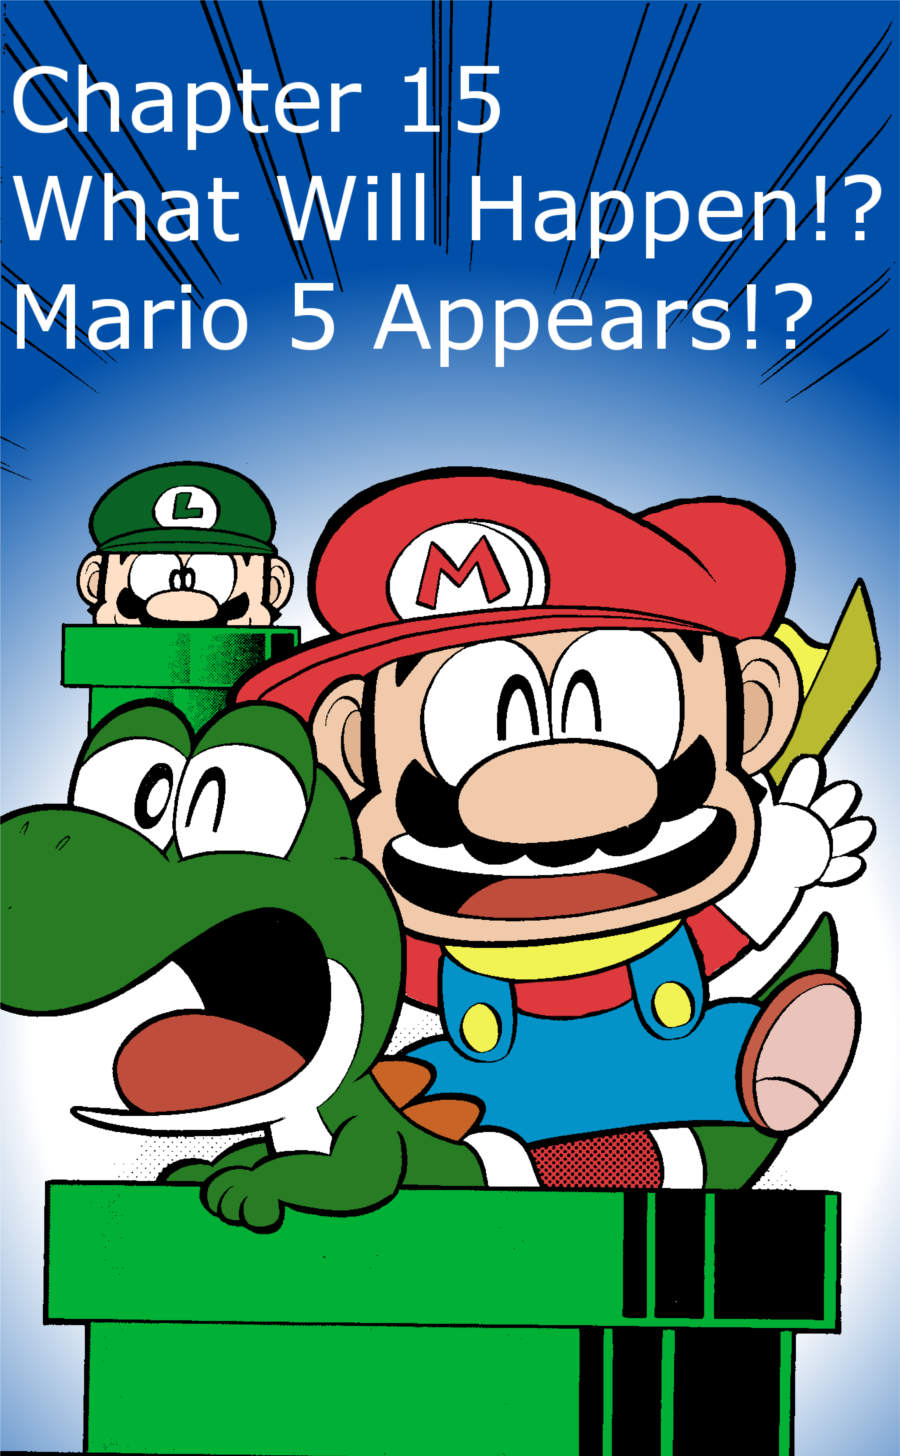 Super Mario-Kun Vol.1 Chapter 15: What Will Happen!? Mario 5 Appears!? - Picture 1